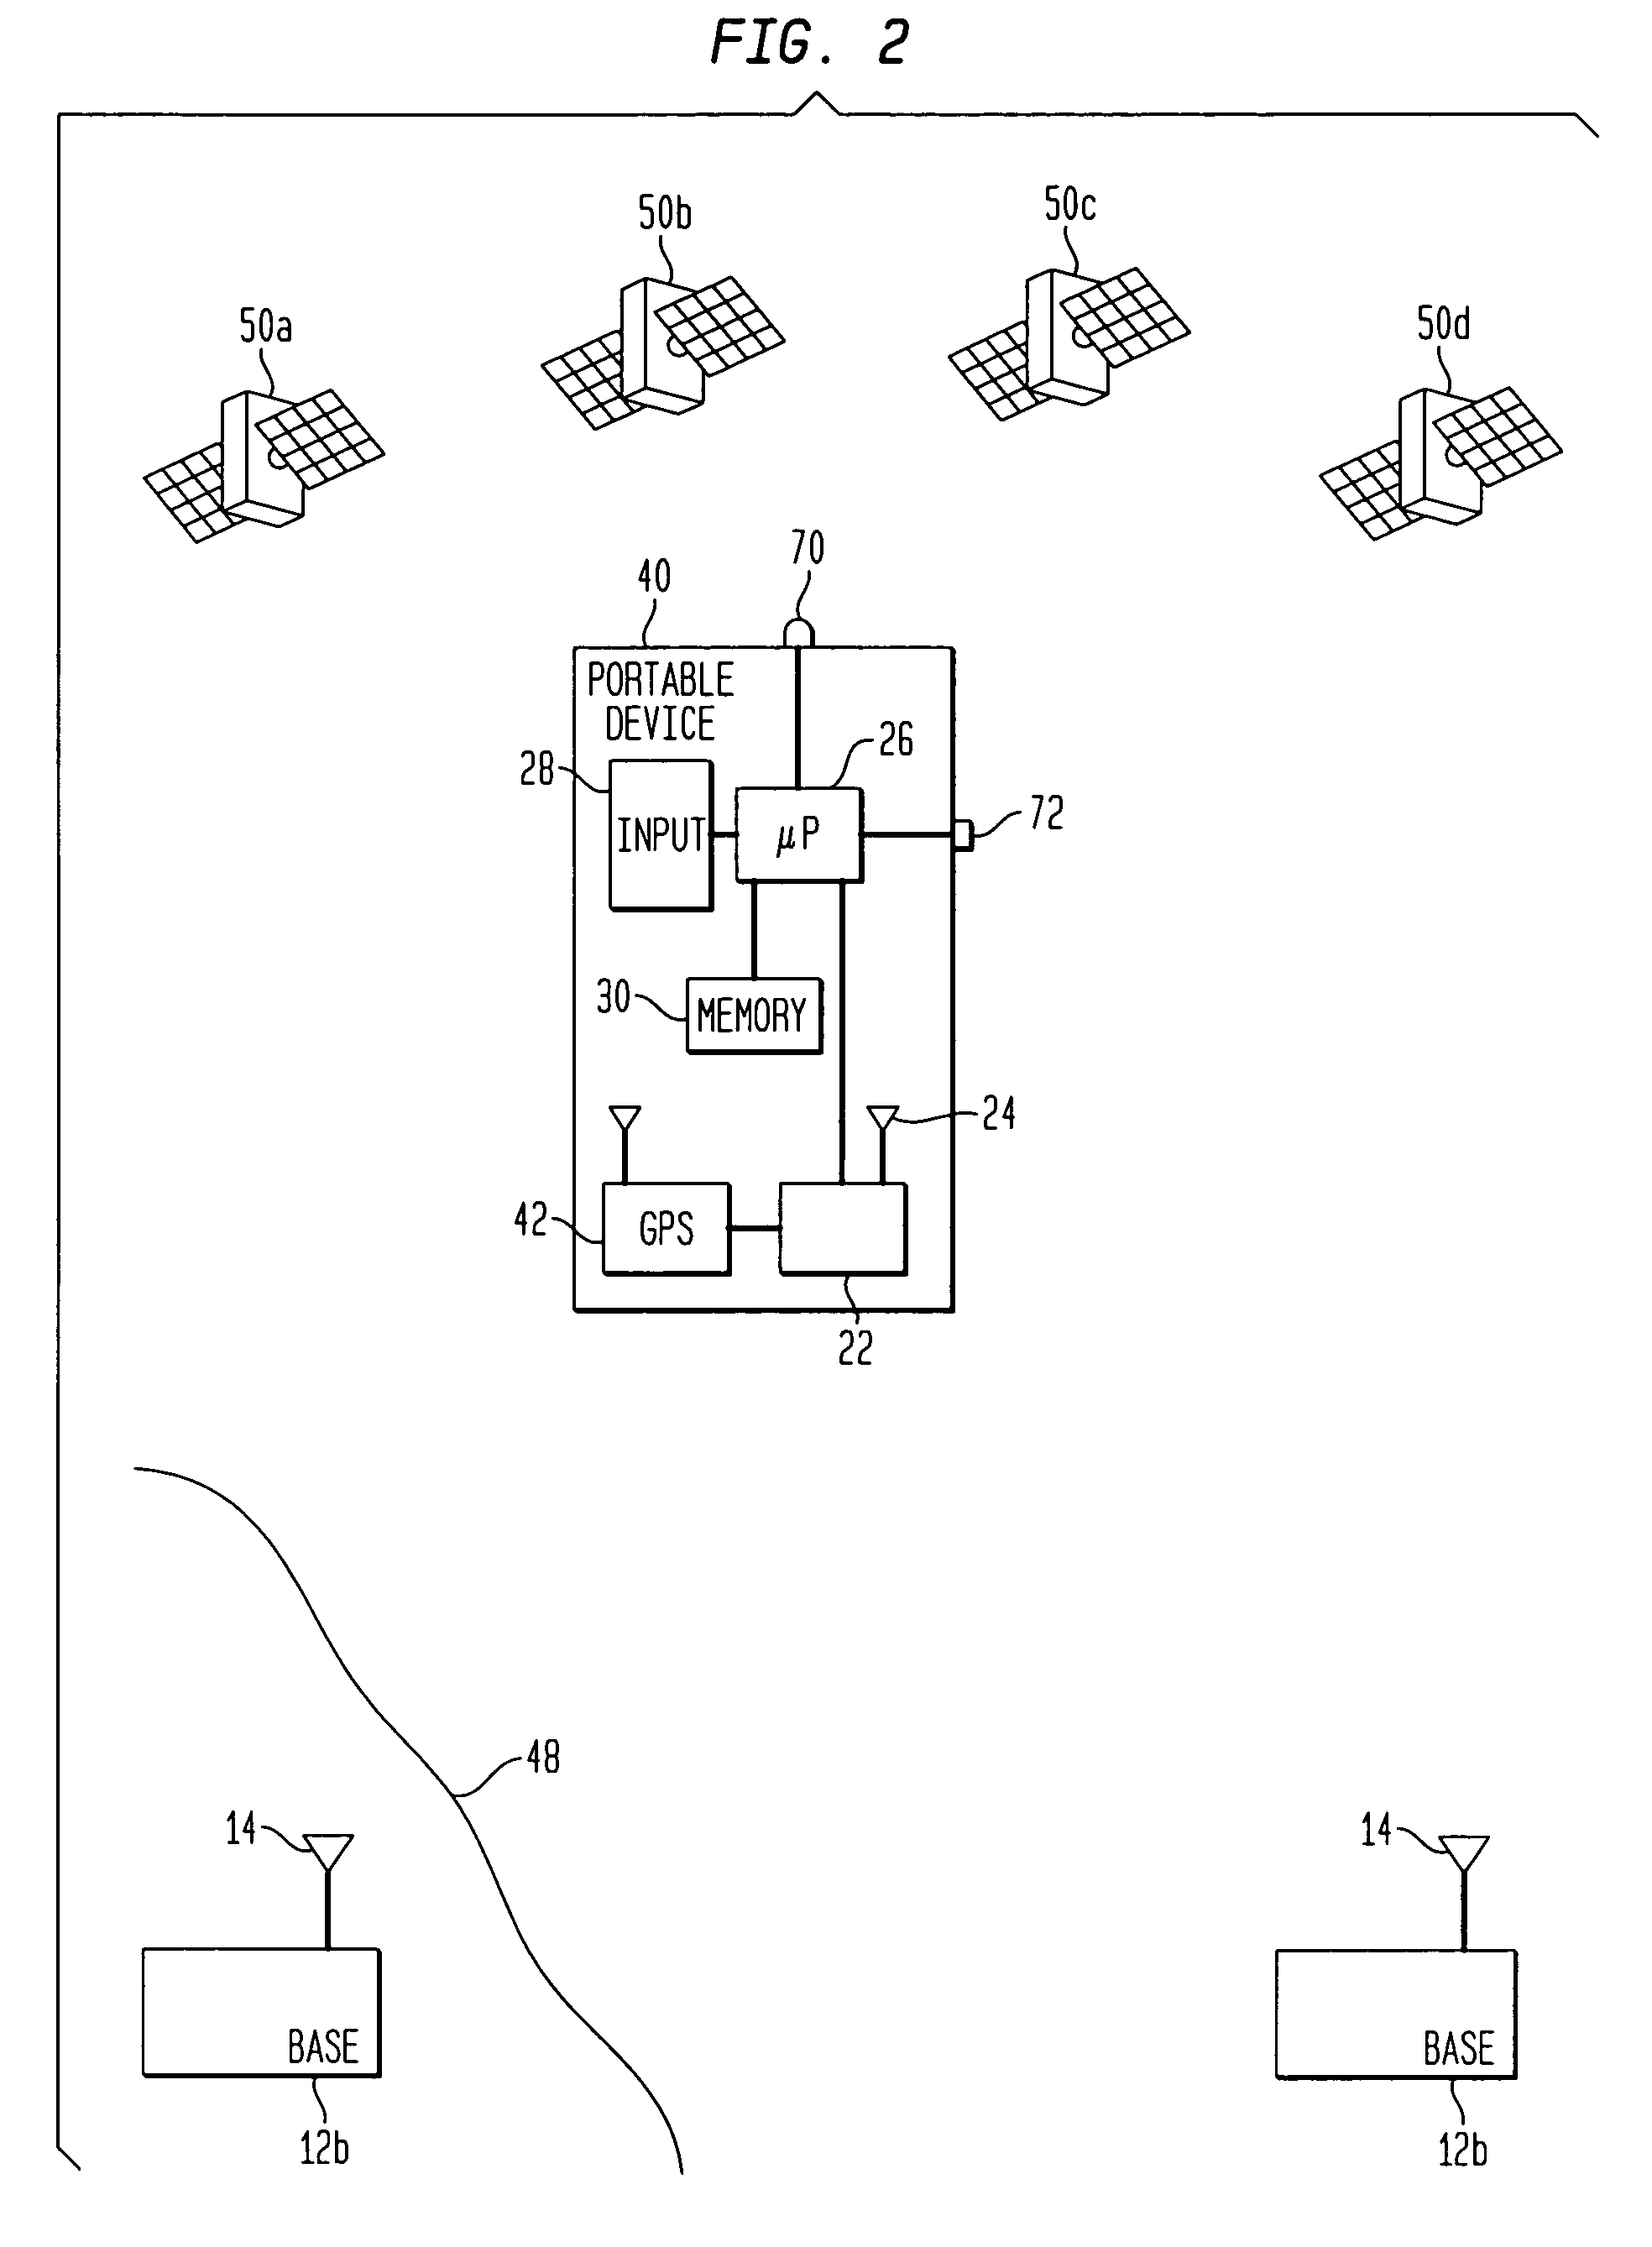 System and method for updating stored information portable electronic devices based on geographic location